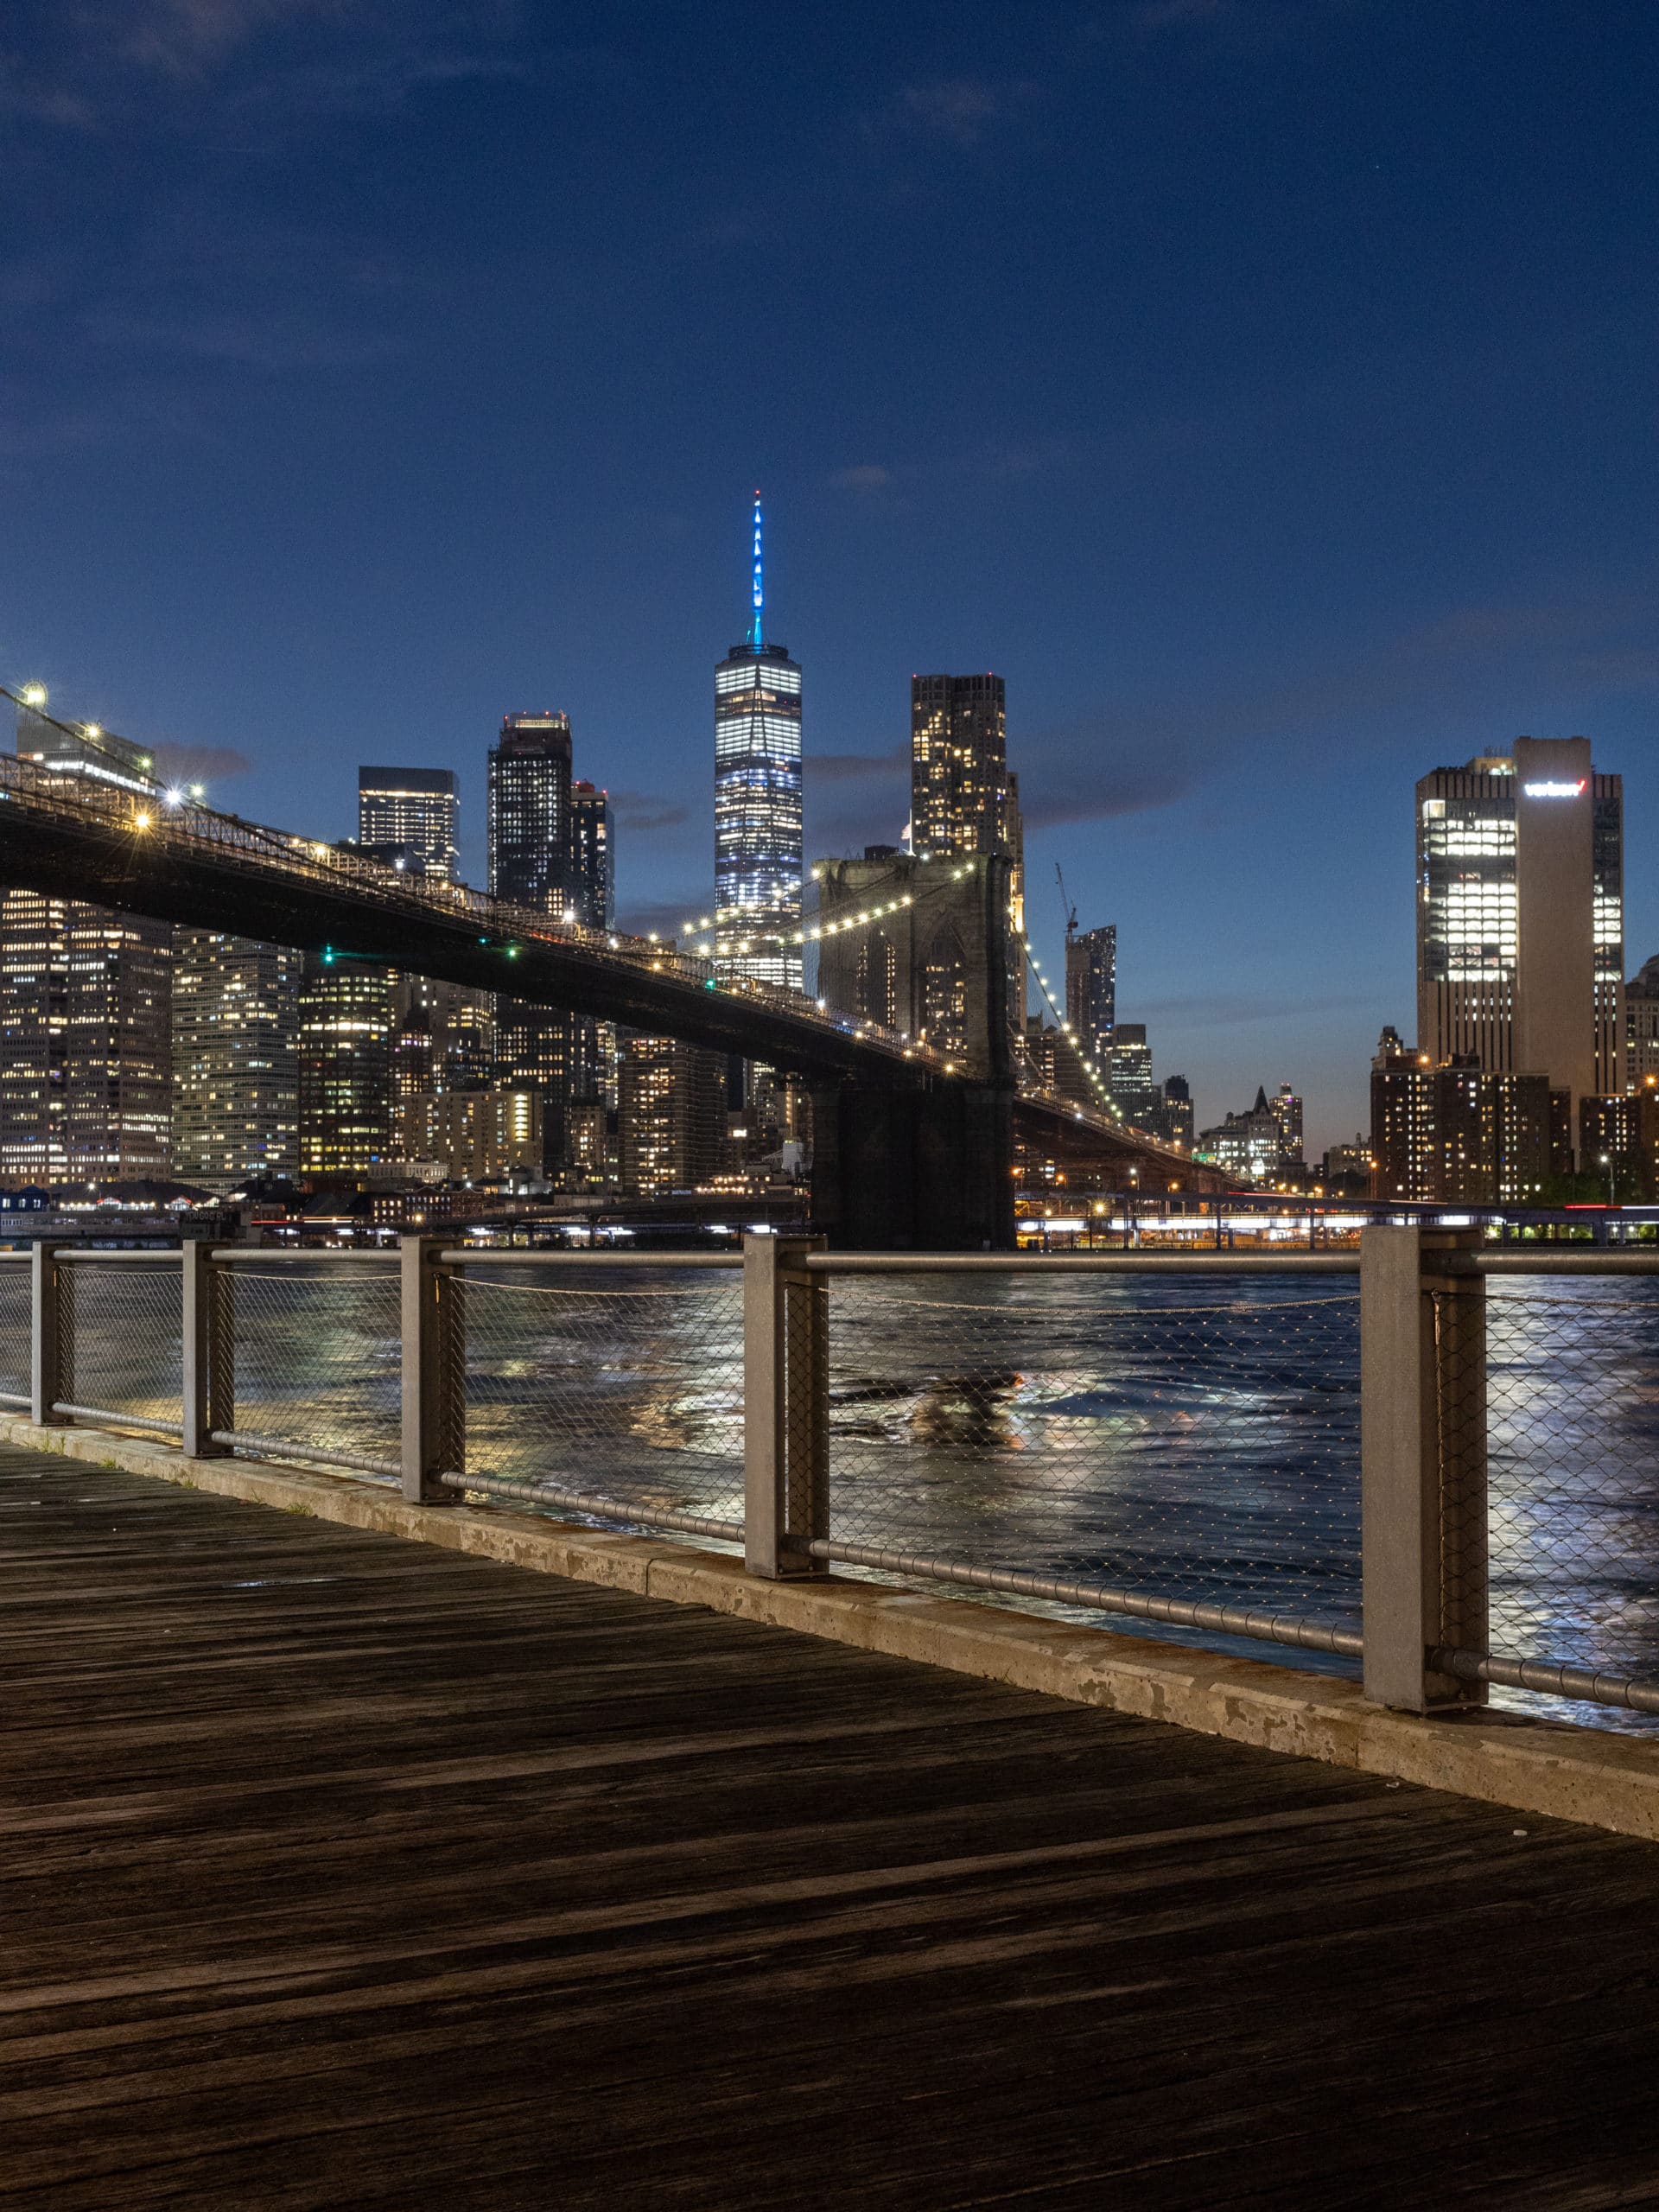 View of the Brooklyn Bridge and Freedom Tower at night from the boardwalk.